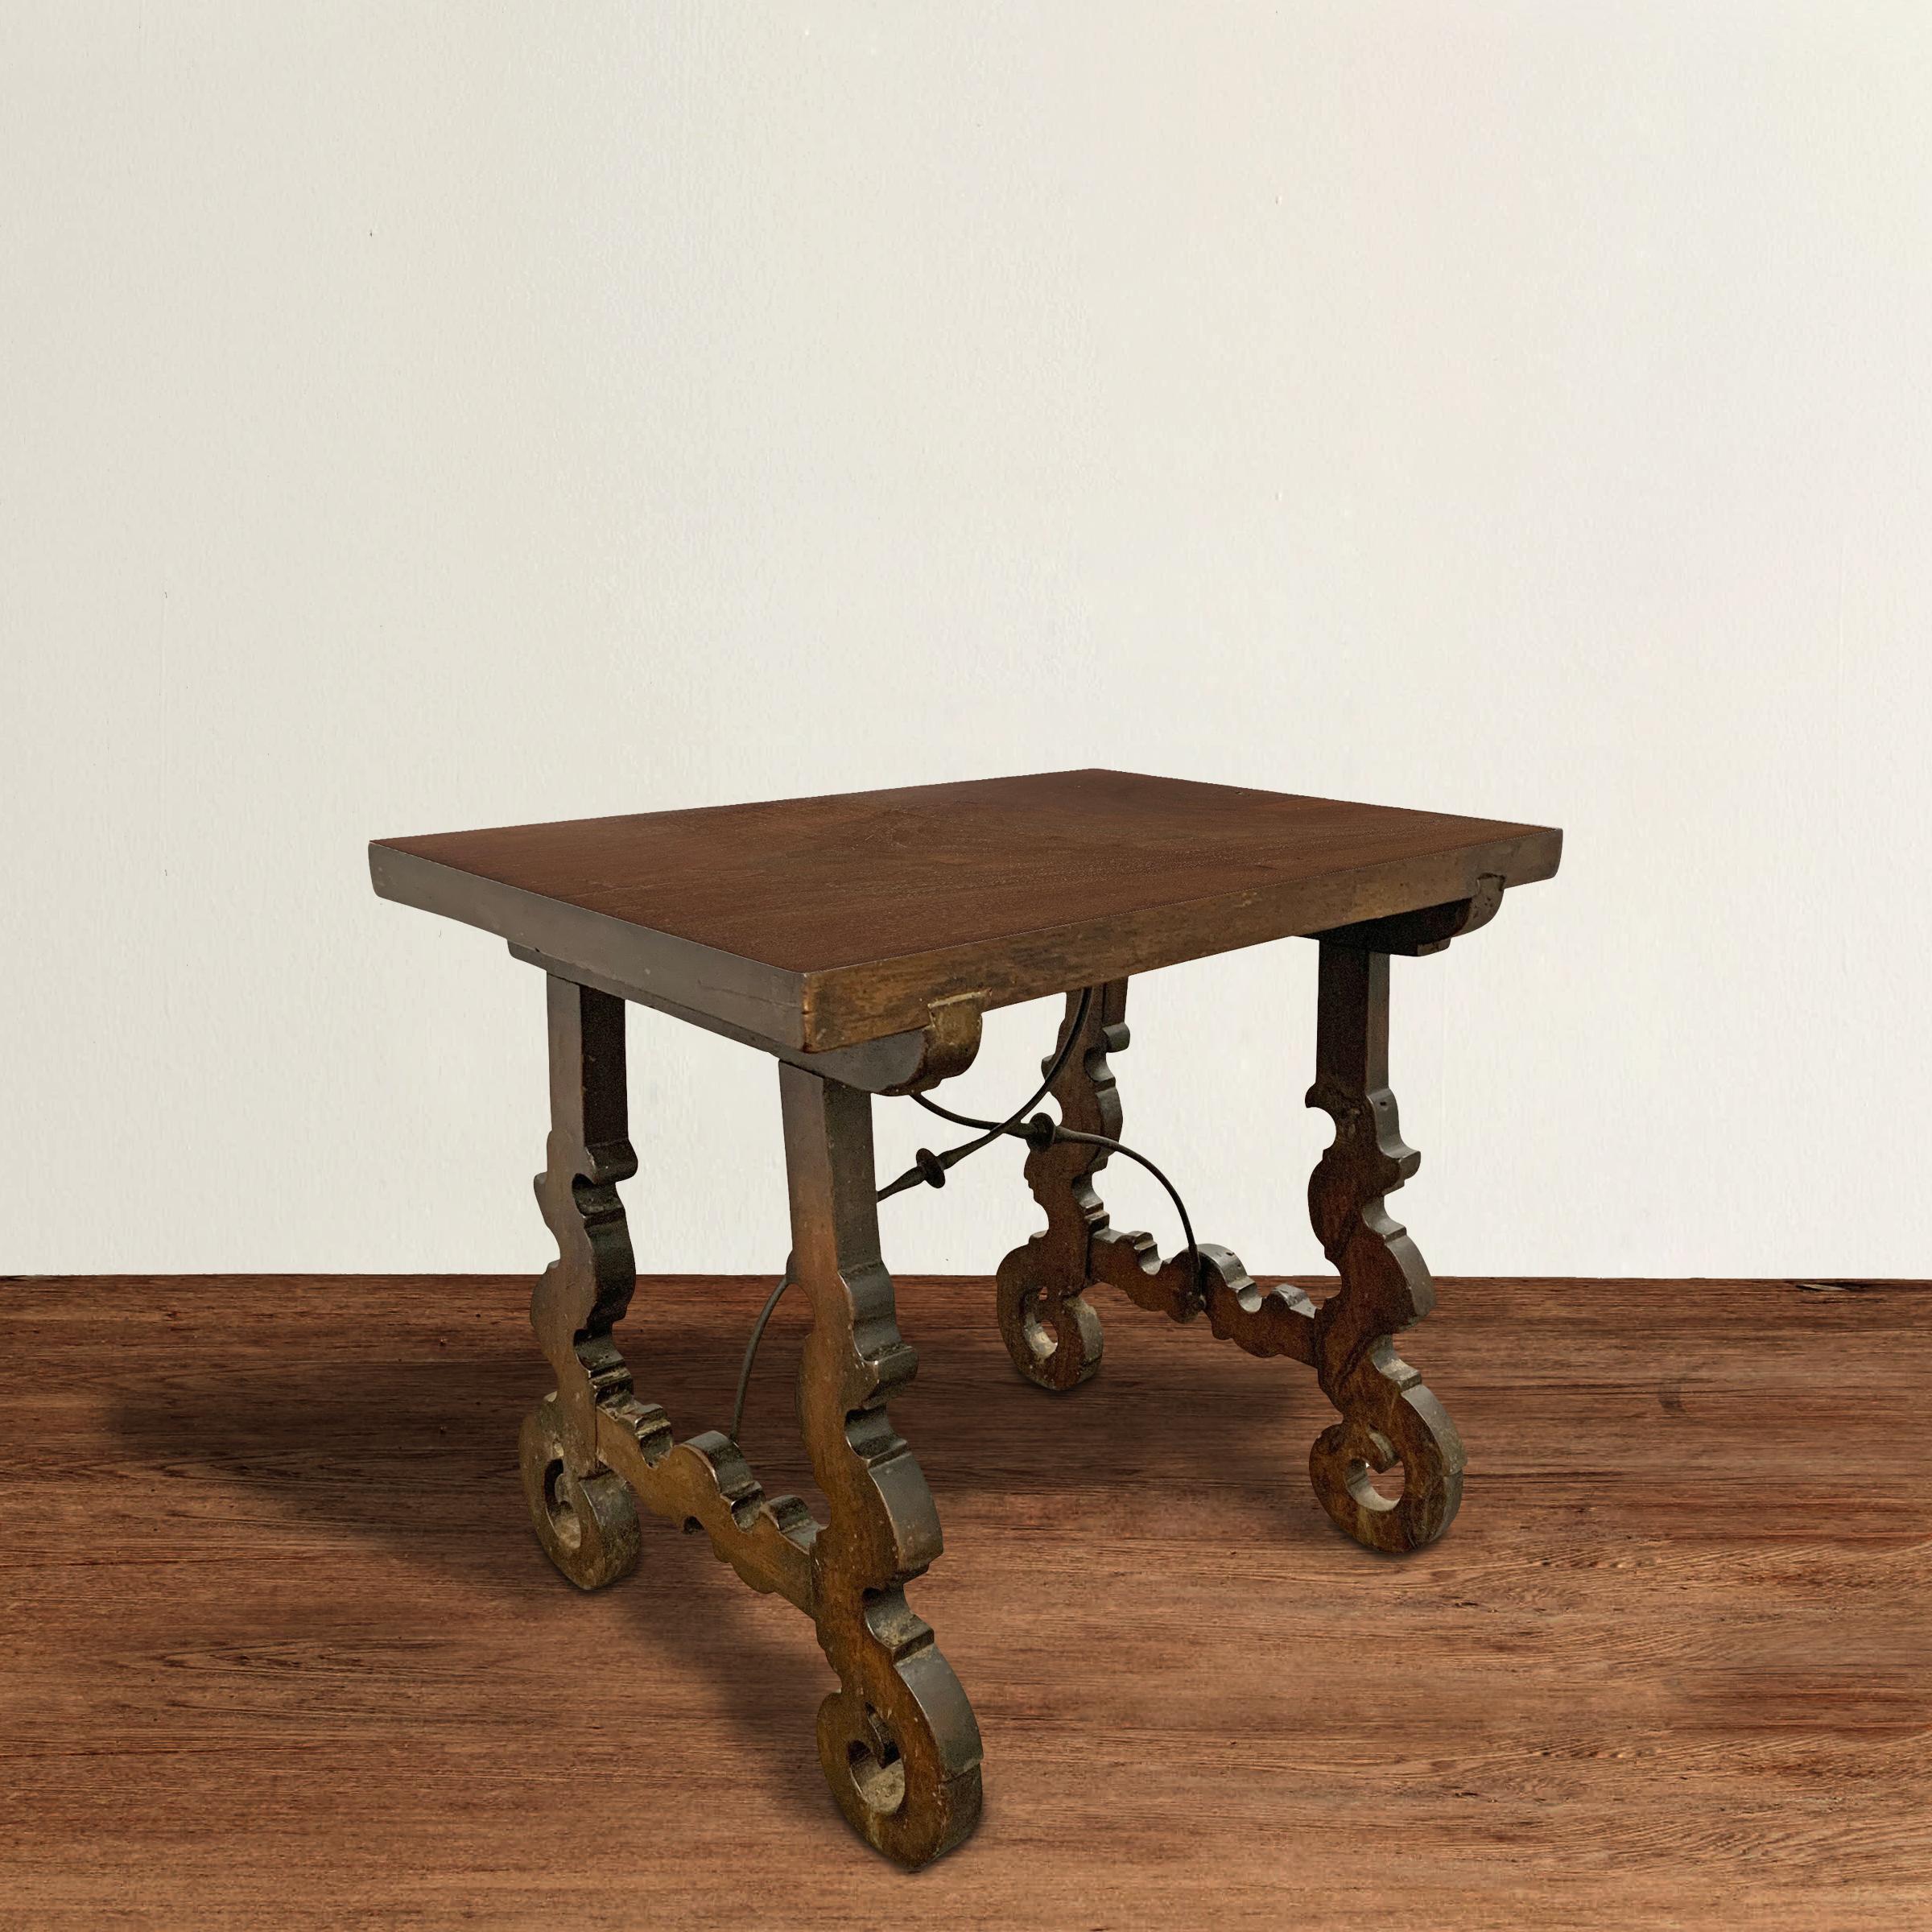 A wonderful petite 18th century Spanish table constructed of walnut and with highly stylized floral carved legs, with two hand-wrought iron stretchers supporting the base. The top has been refinished, but retains the character of the original piece.